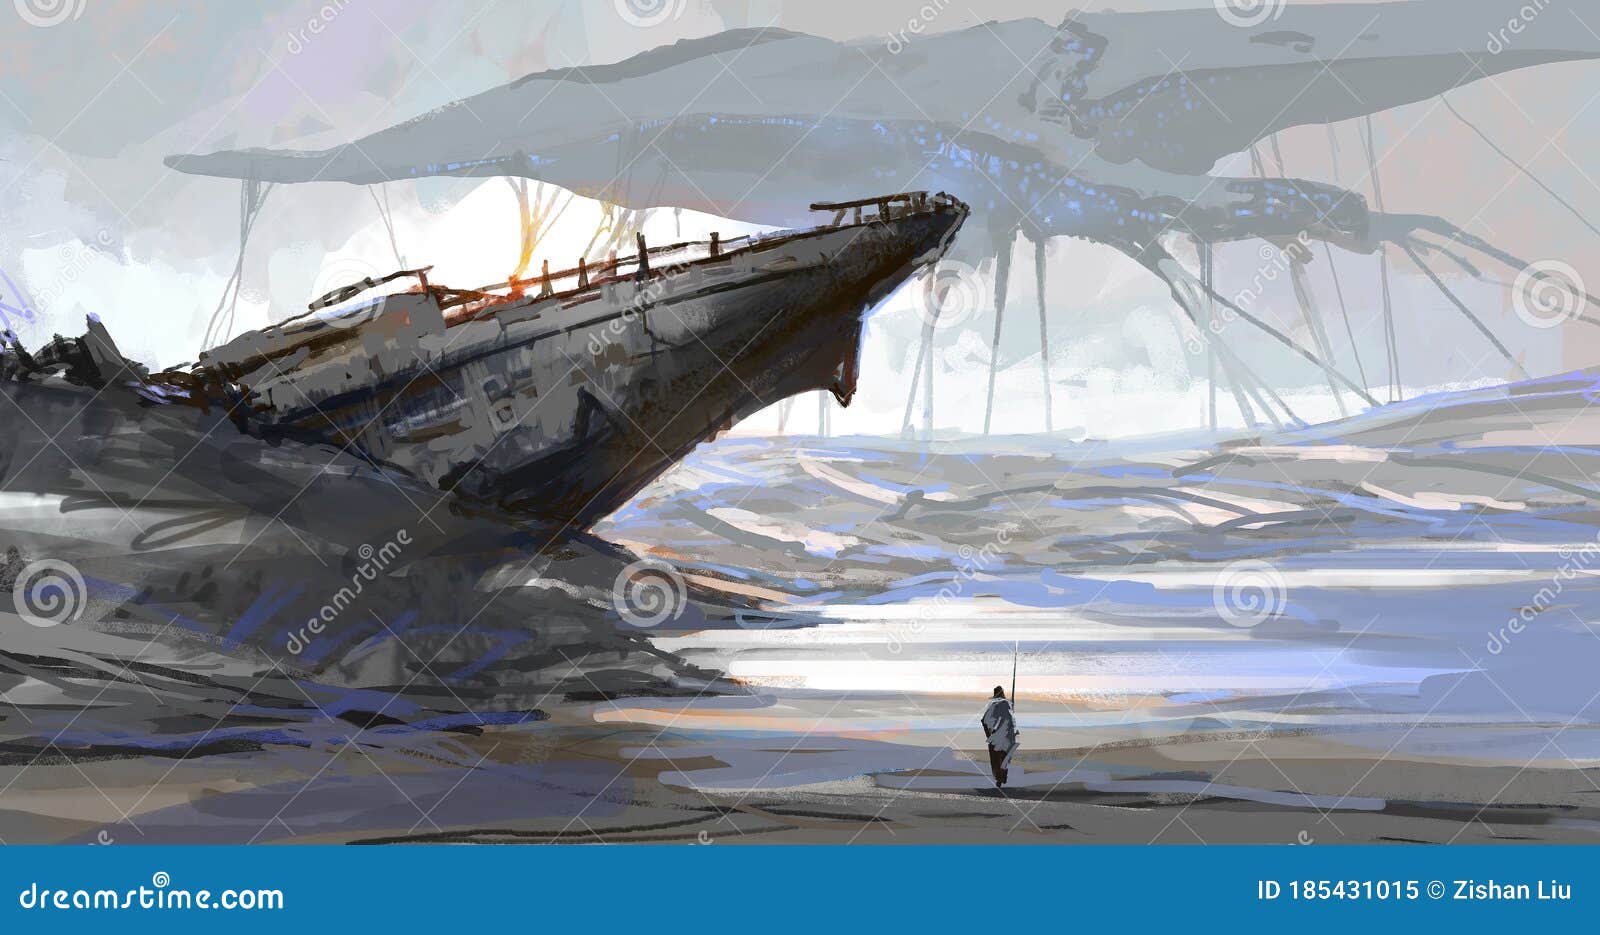 the ship that was stranded by the dry sea, the earth scene after the aliens invaded.